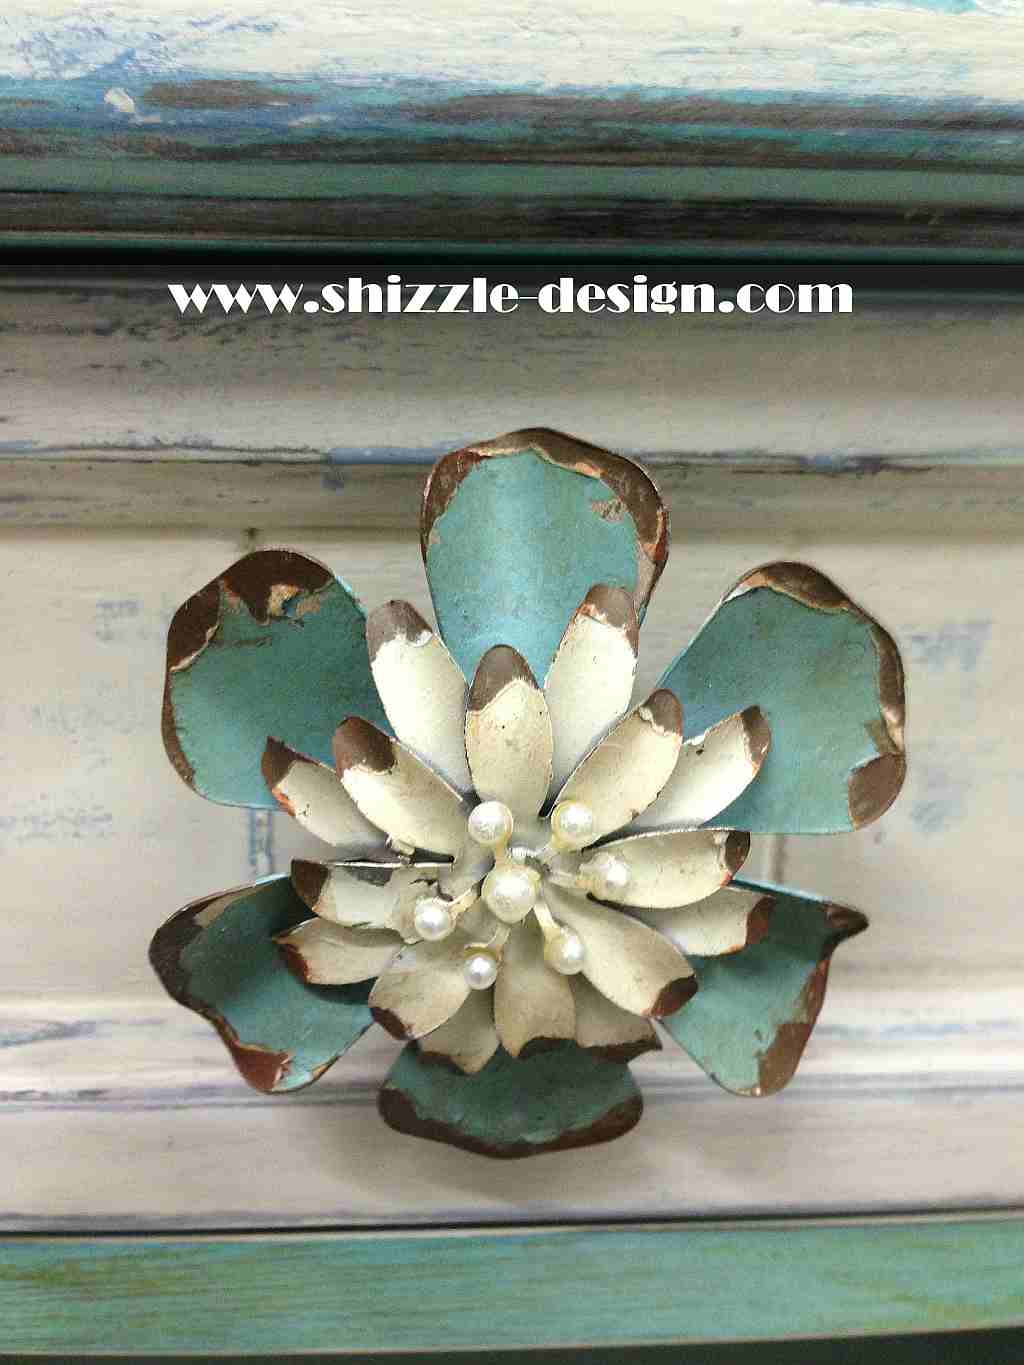 Shizzle Design chalk and clay painted furniture coffee table turquoise American Paint Company Women's Expo ideas color inspiration